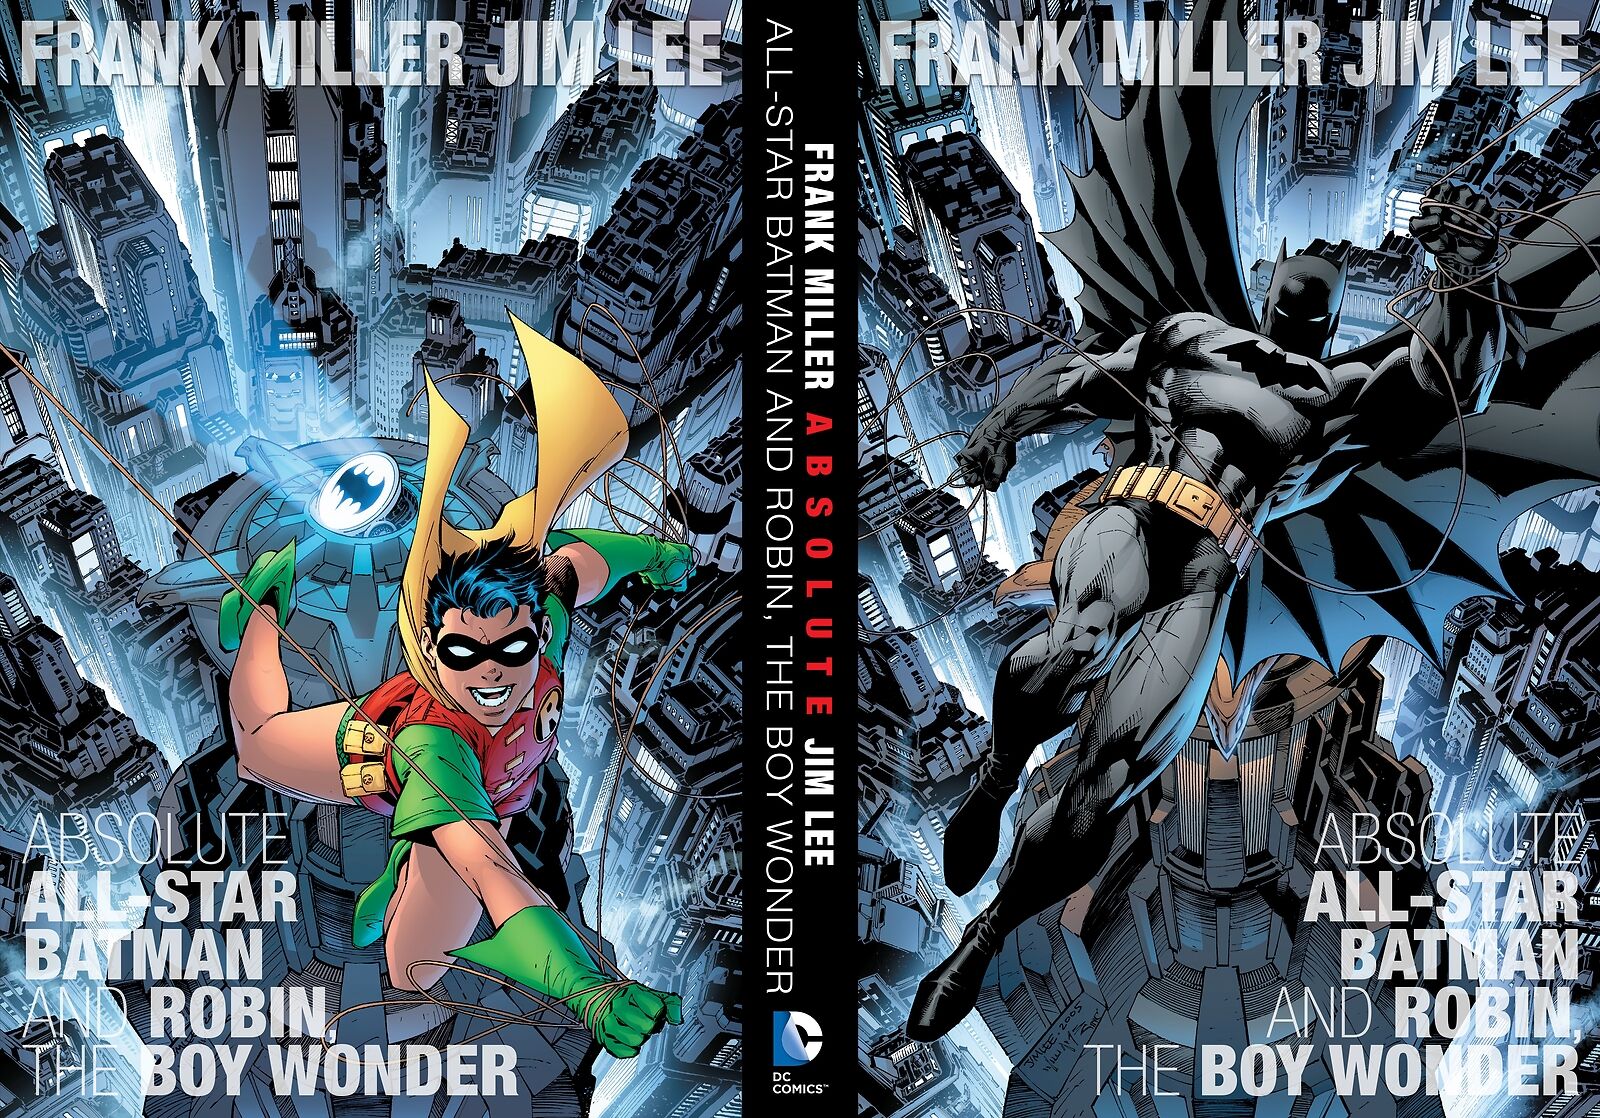 Absolute All-Star Batman And Robin, The Boy Wonder [Hardcover] Miller, Frank and